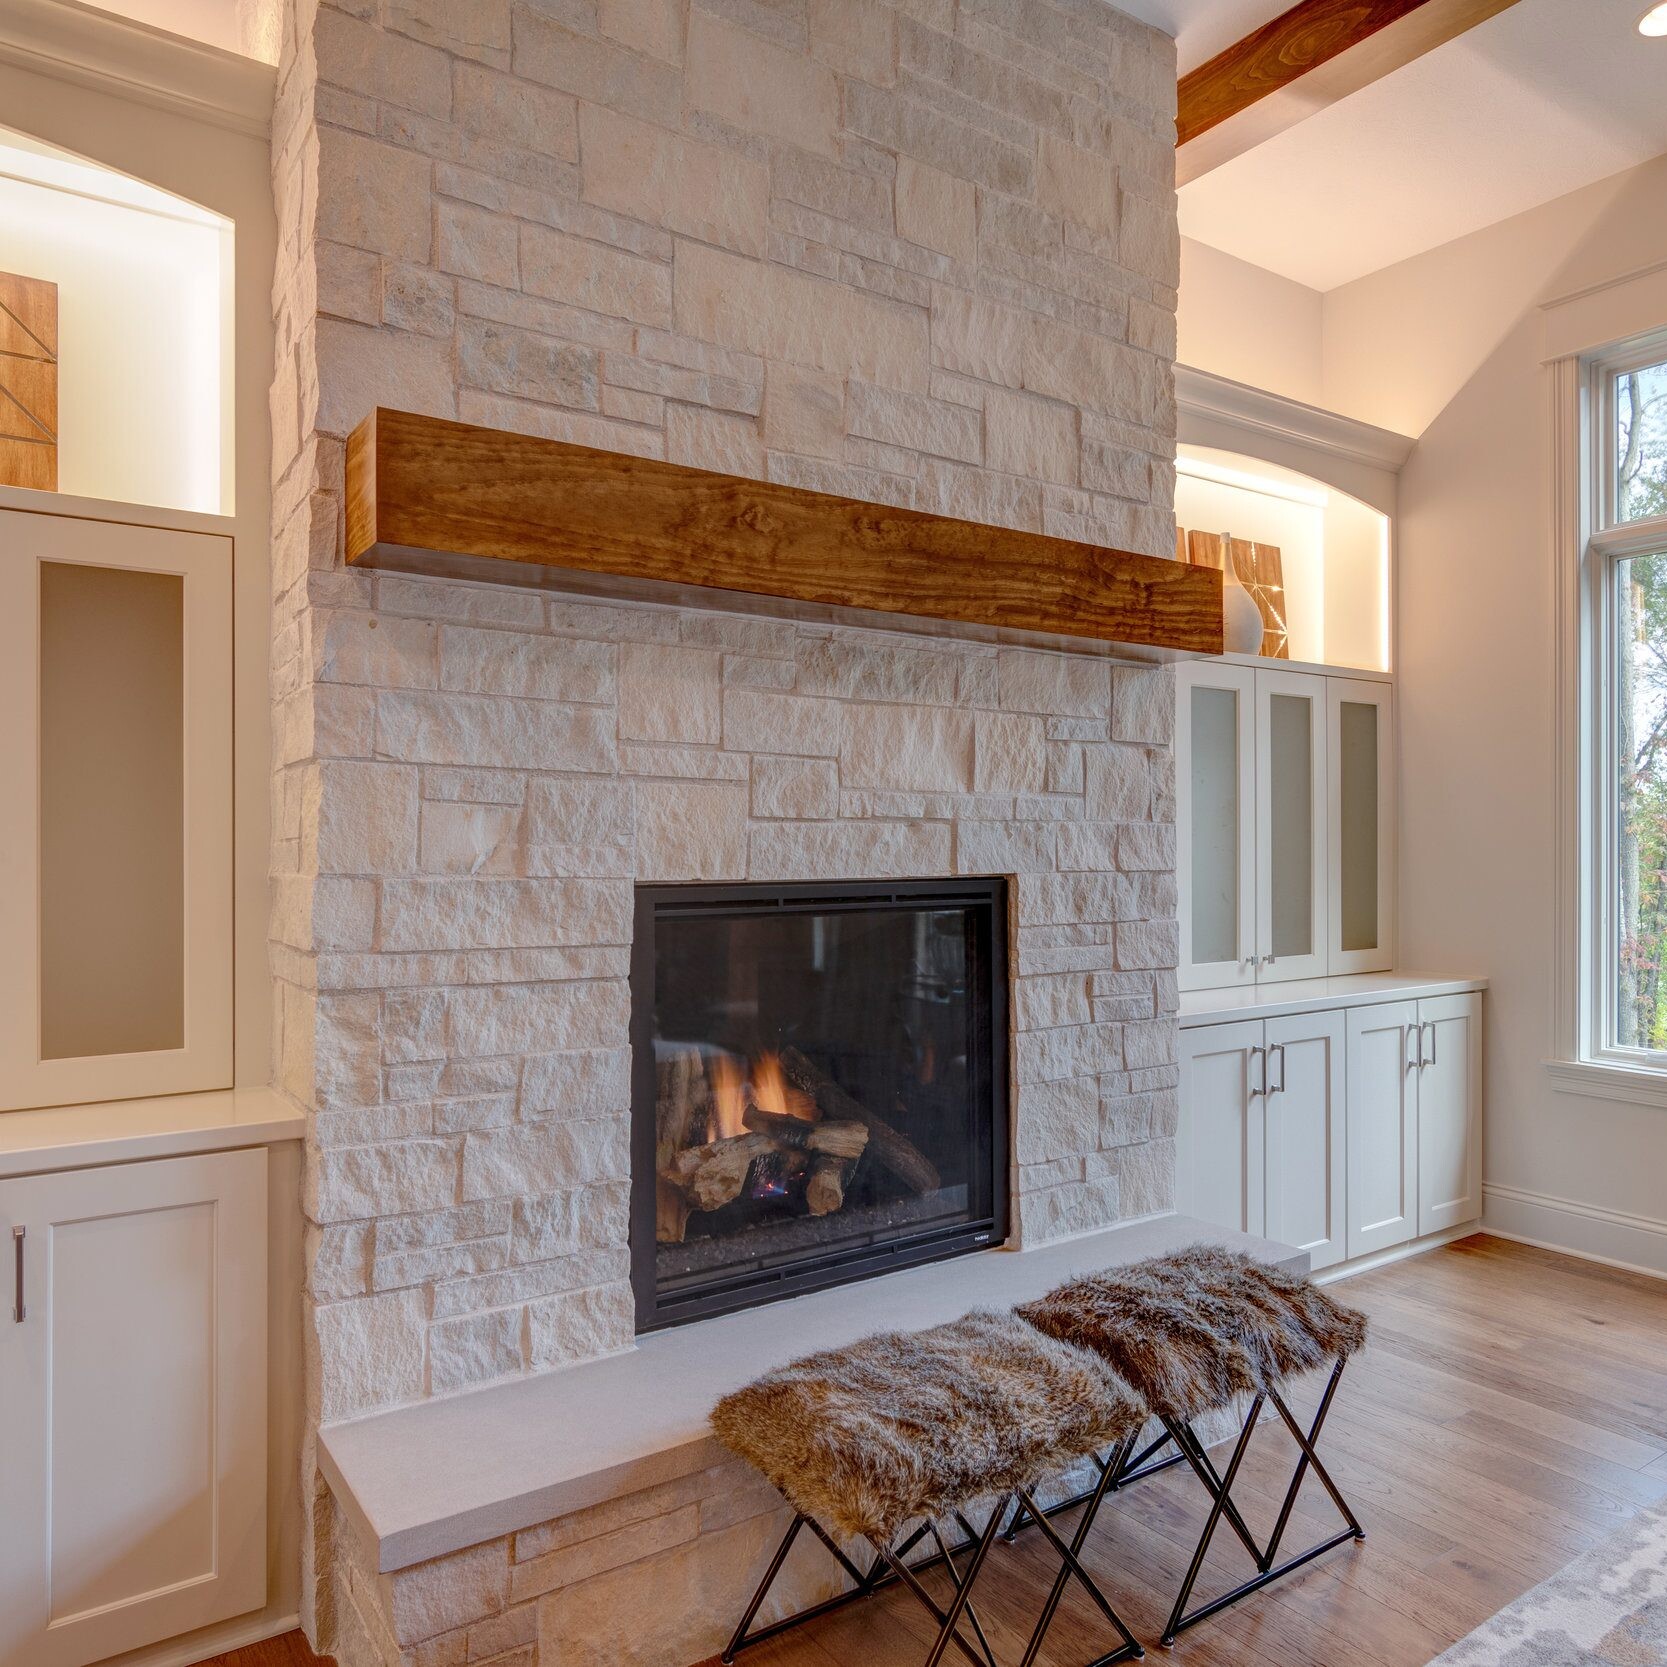 A newly constructed living room with a stone fireplace and white cabinets, built by a custom home builder in Carmel, Indiana.